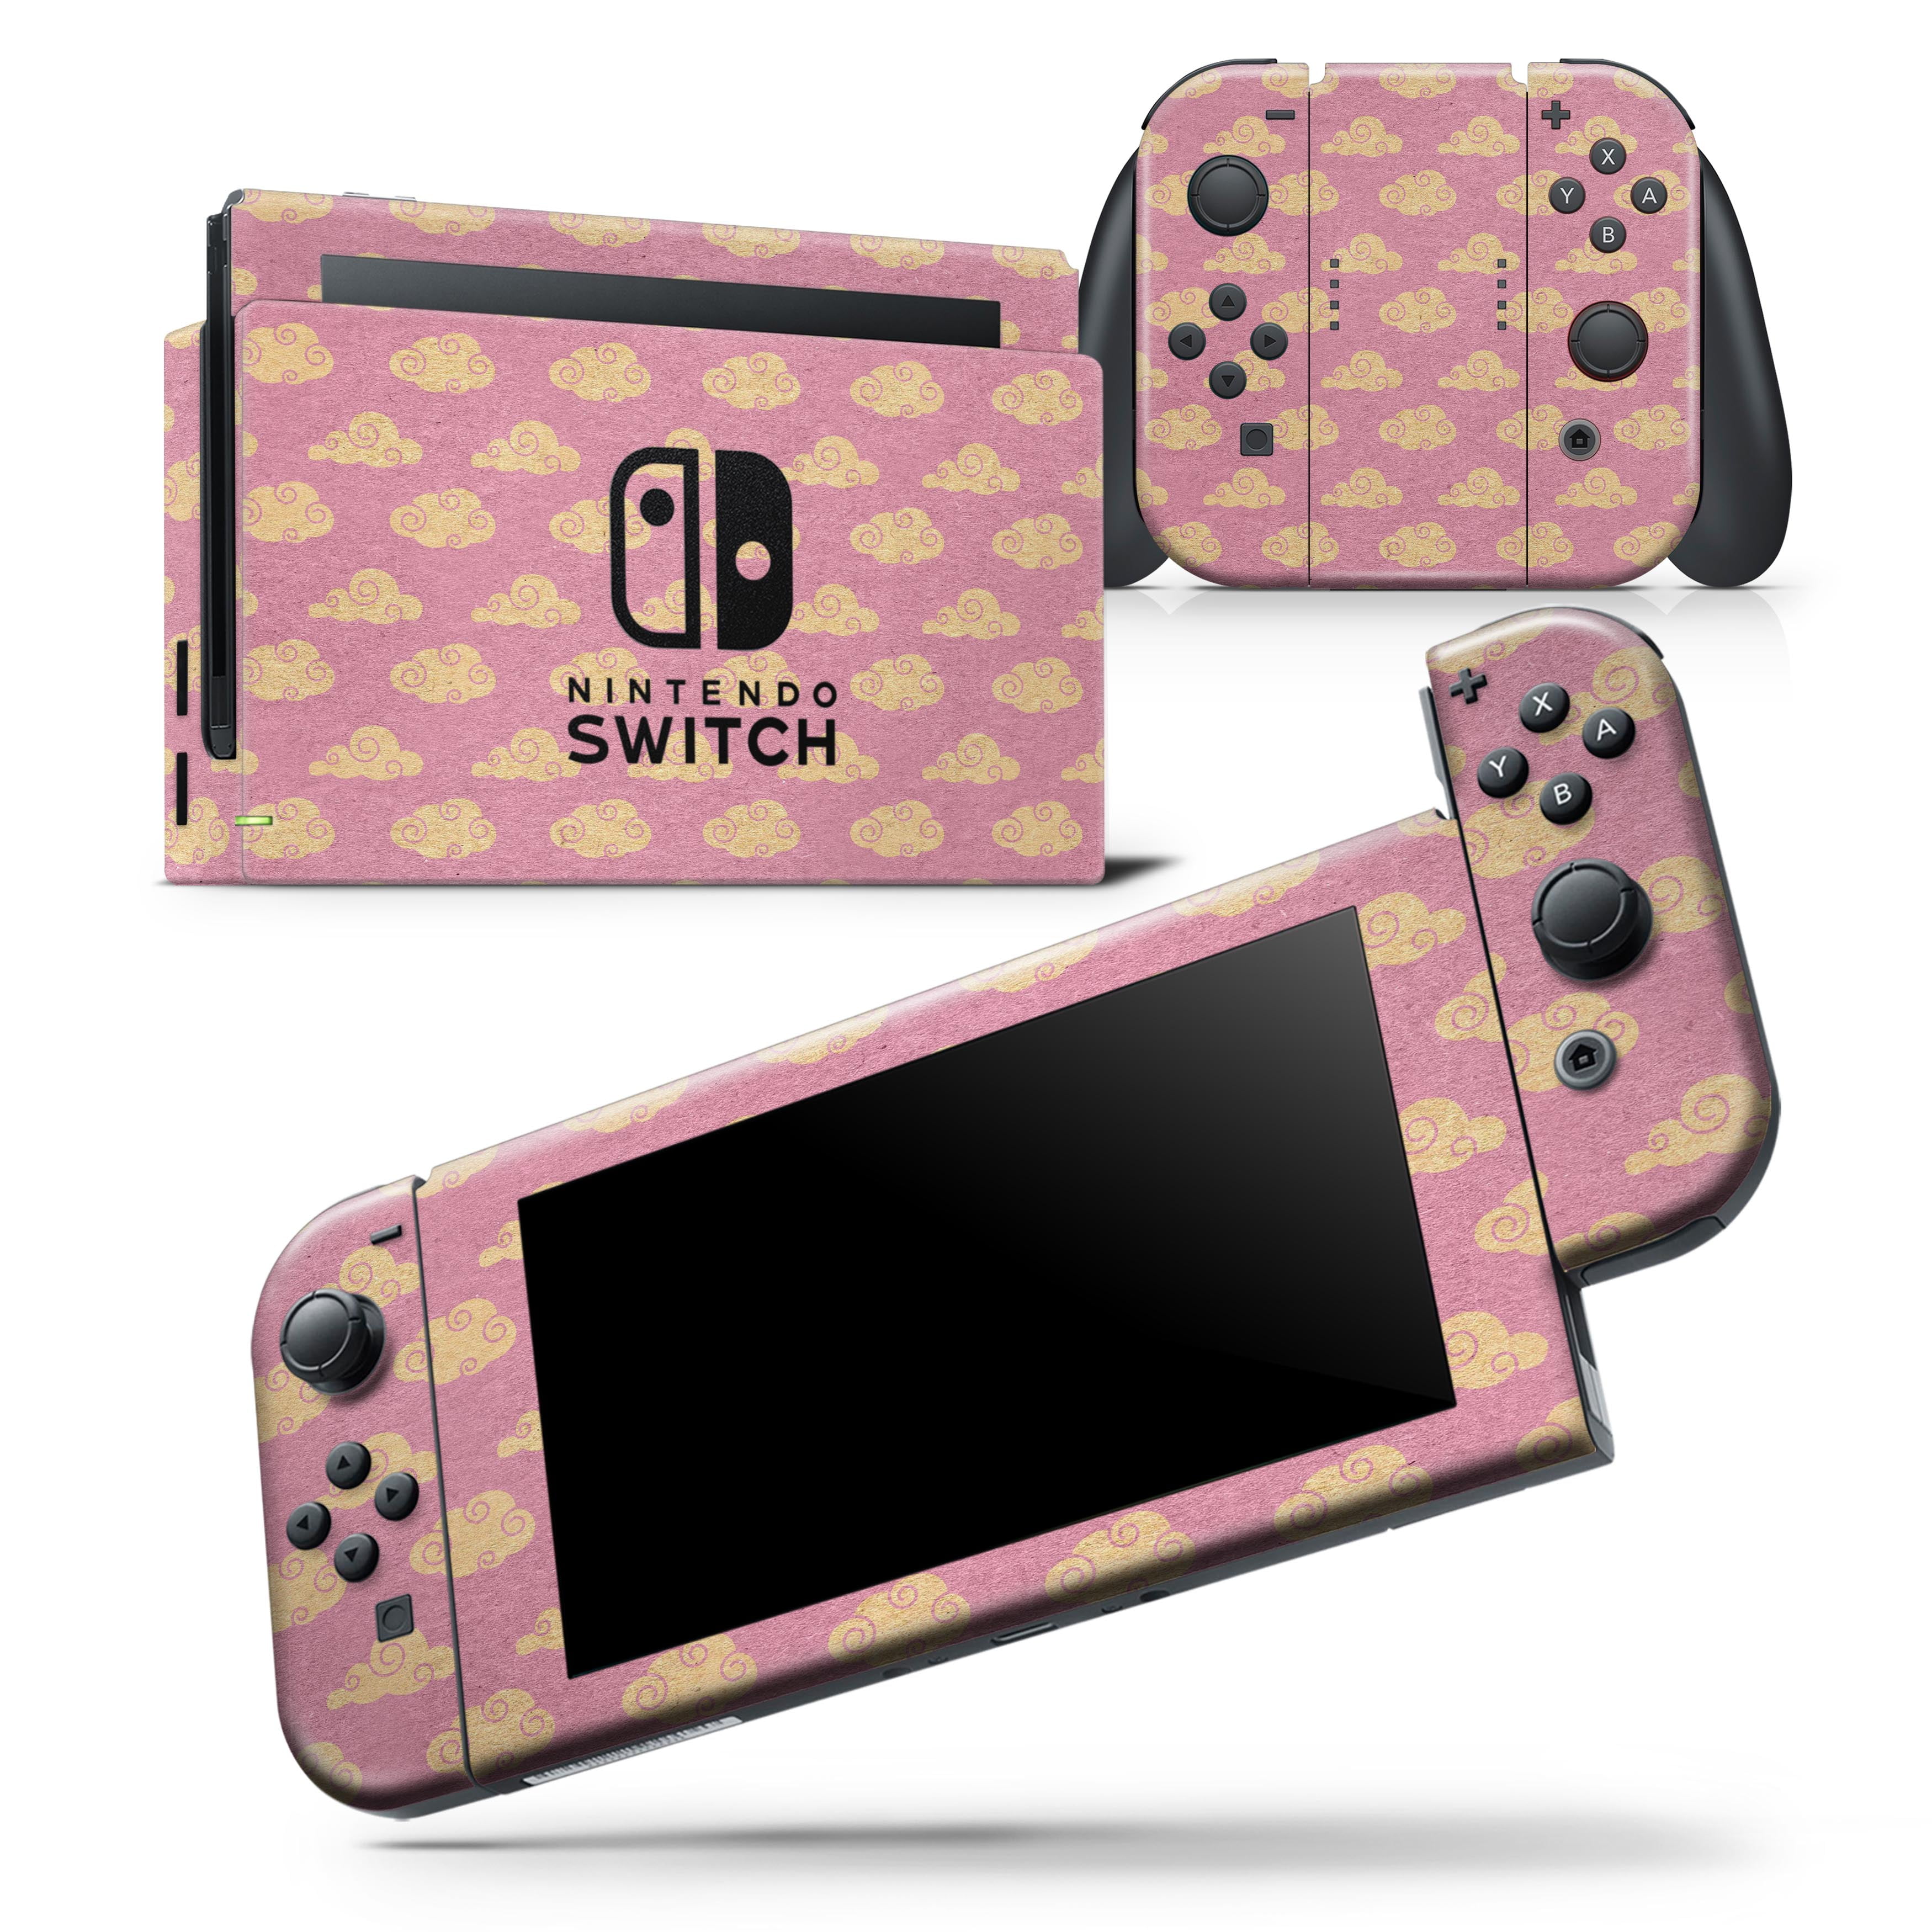 Golden Cartoon Clouds Over Pink Skin Wrap Decal Compatible With The Nintendo Switch Joycons Only Walmart Com Walmart Com - roblox cloud decal